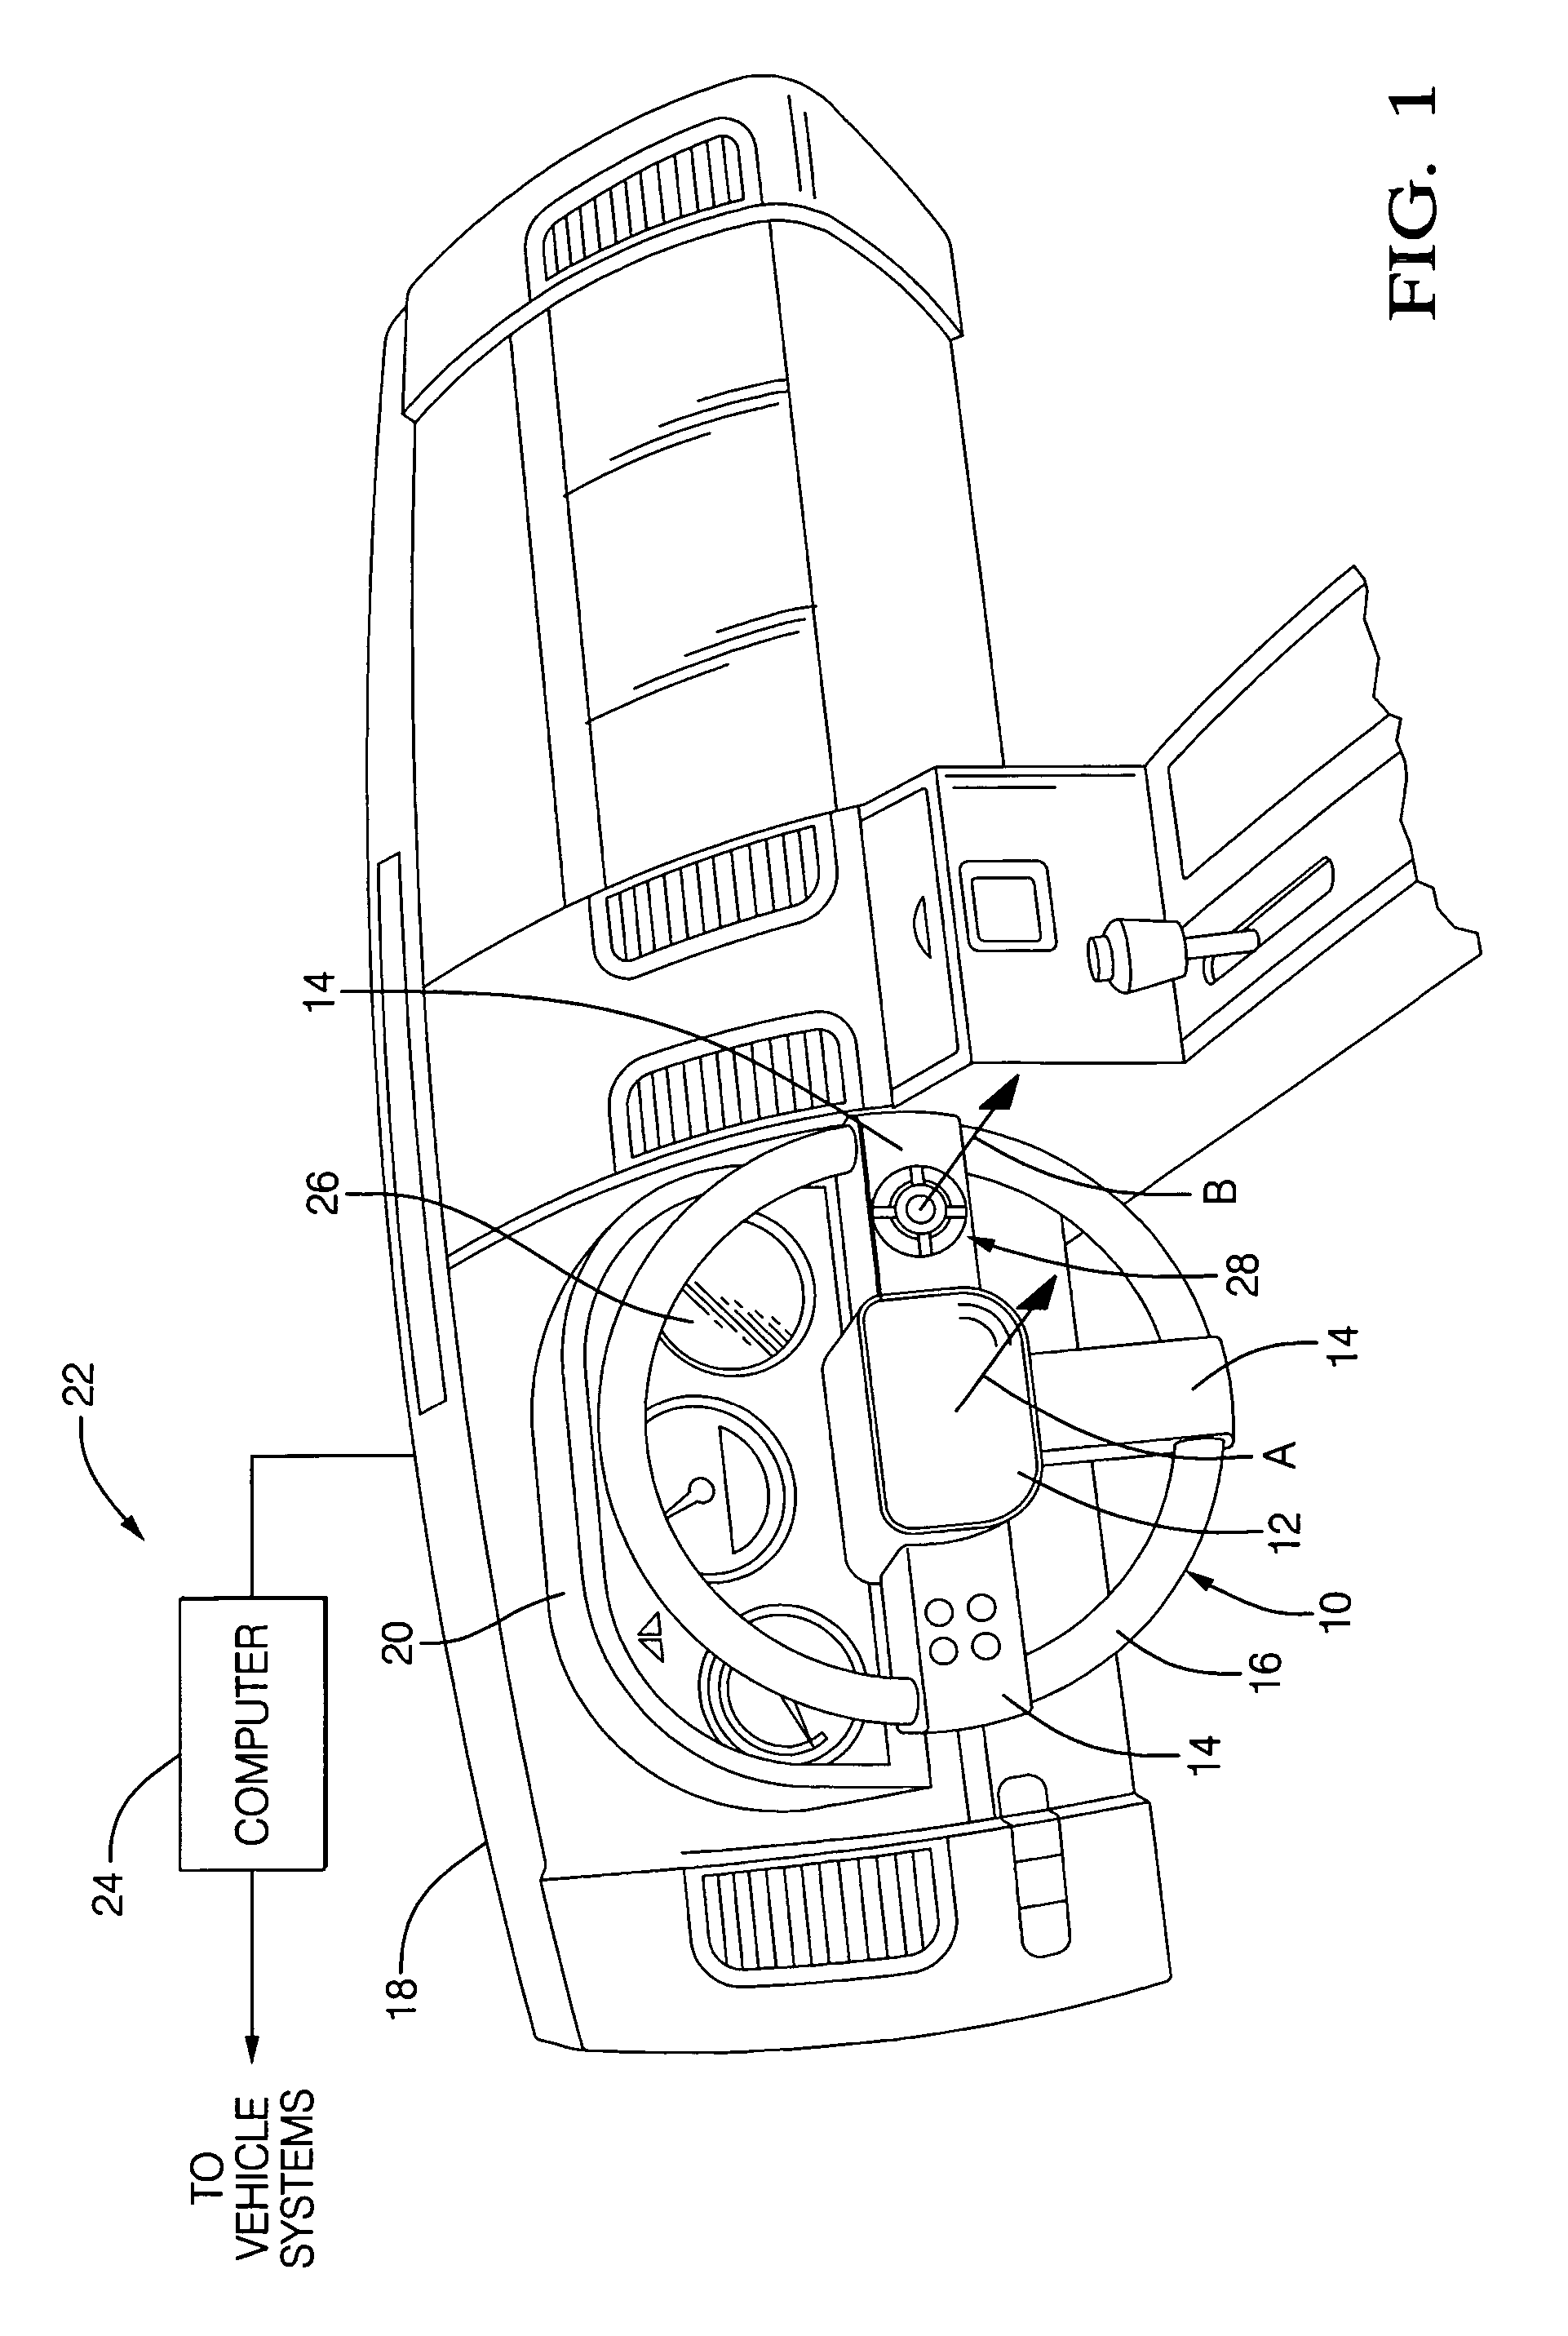 Vehicle information system with steering wheel controller